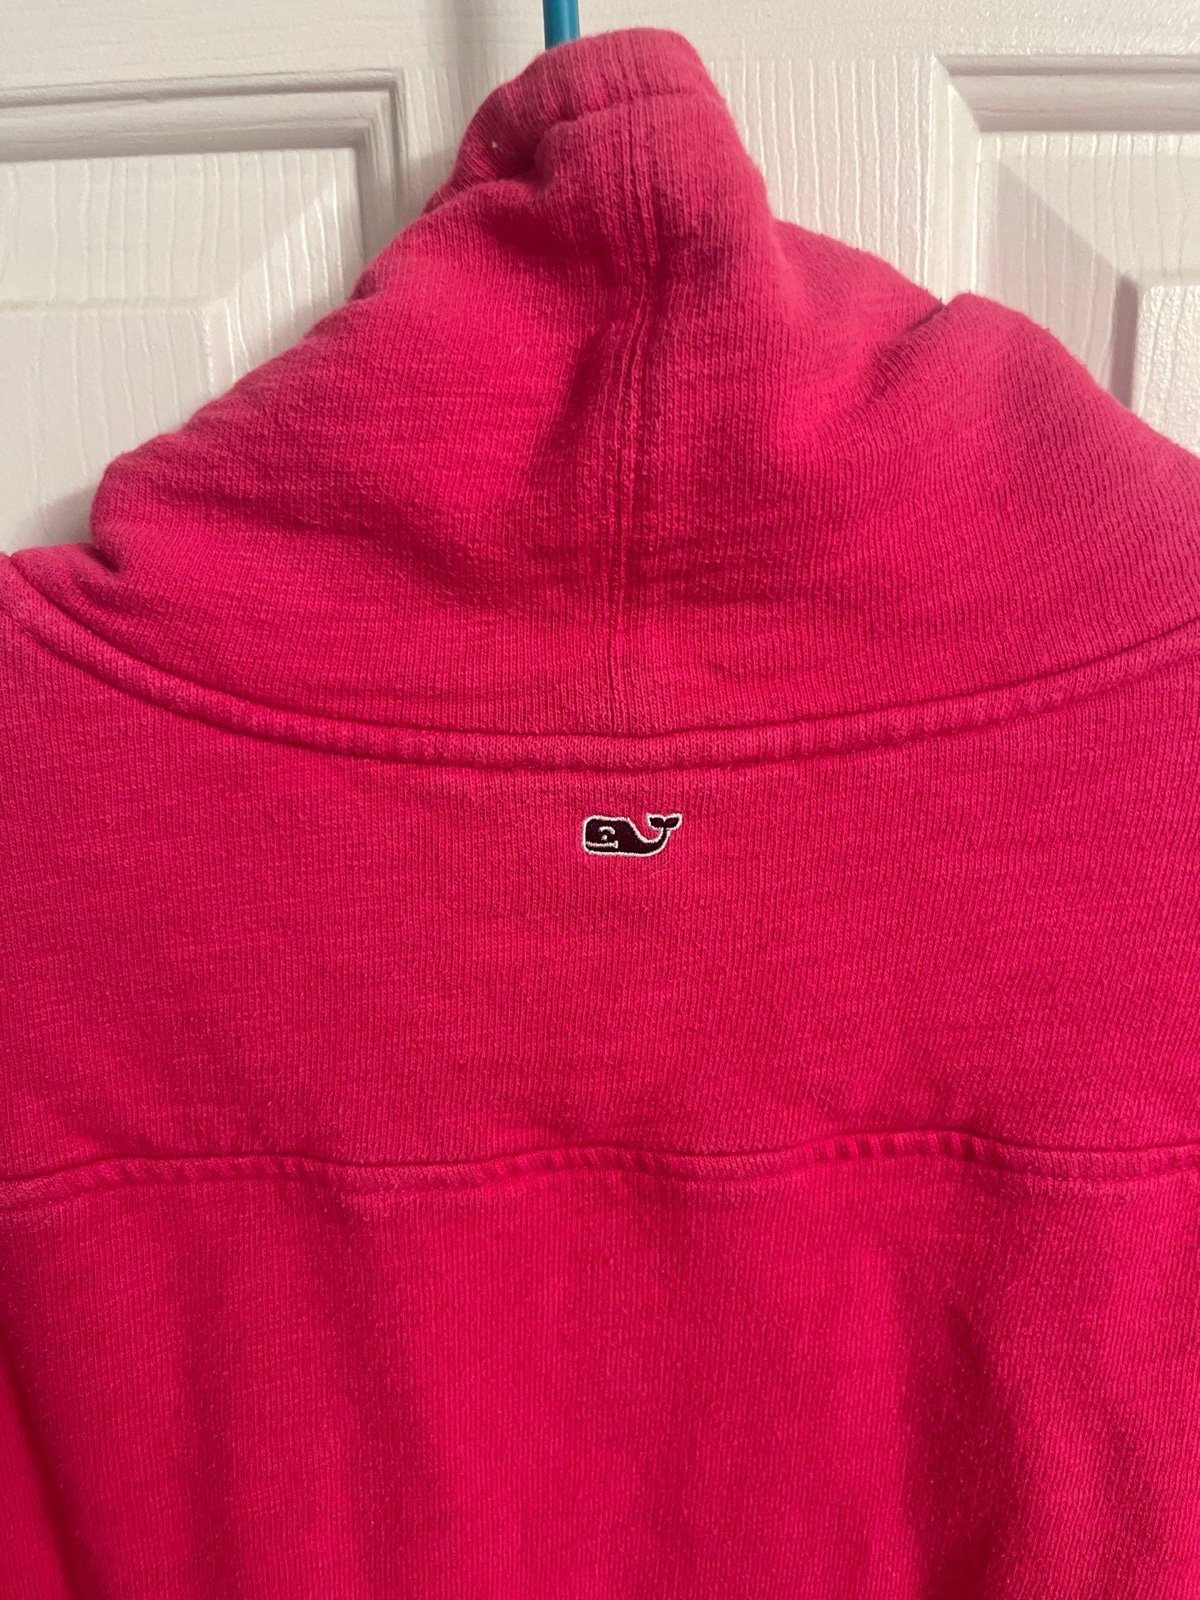 Great vineyard vines pullover lM6sZ2LVO New Style